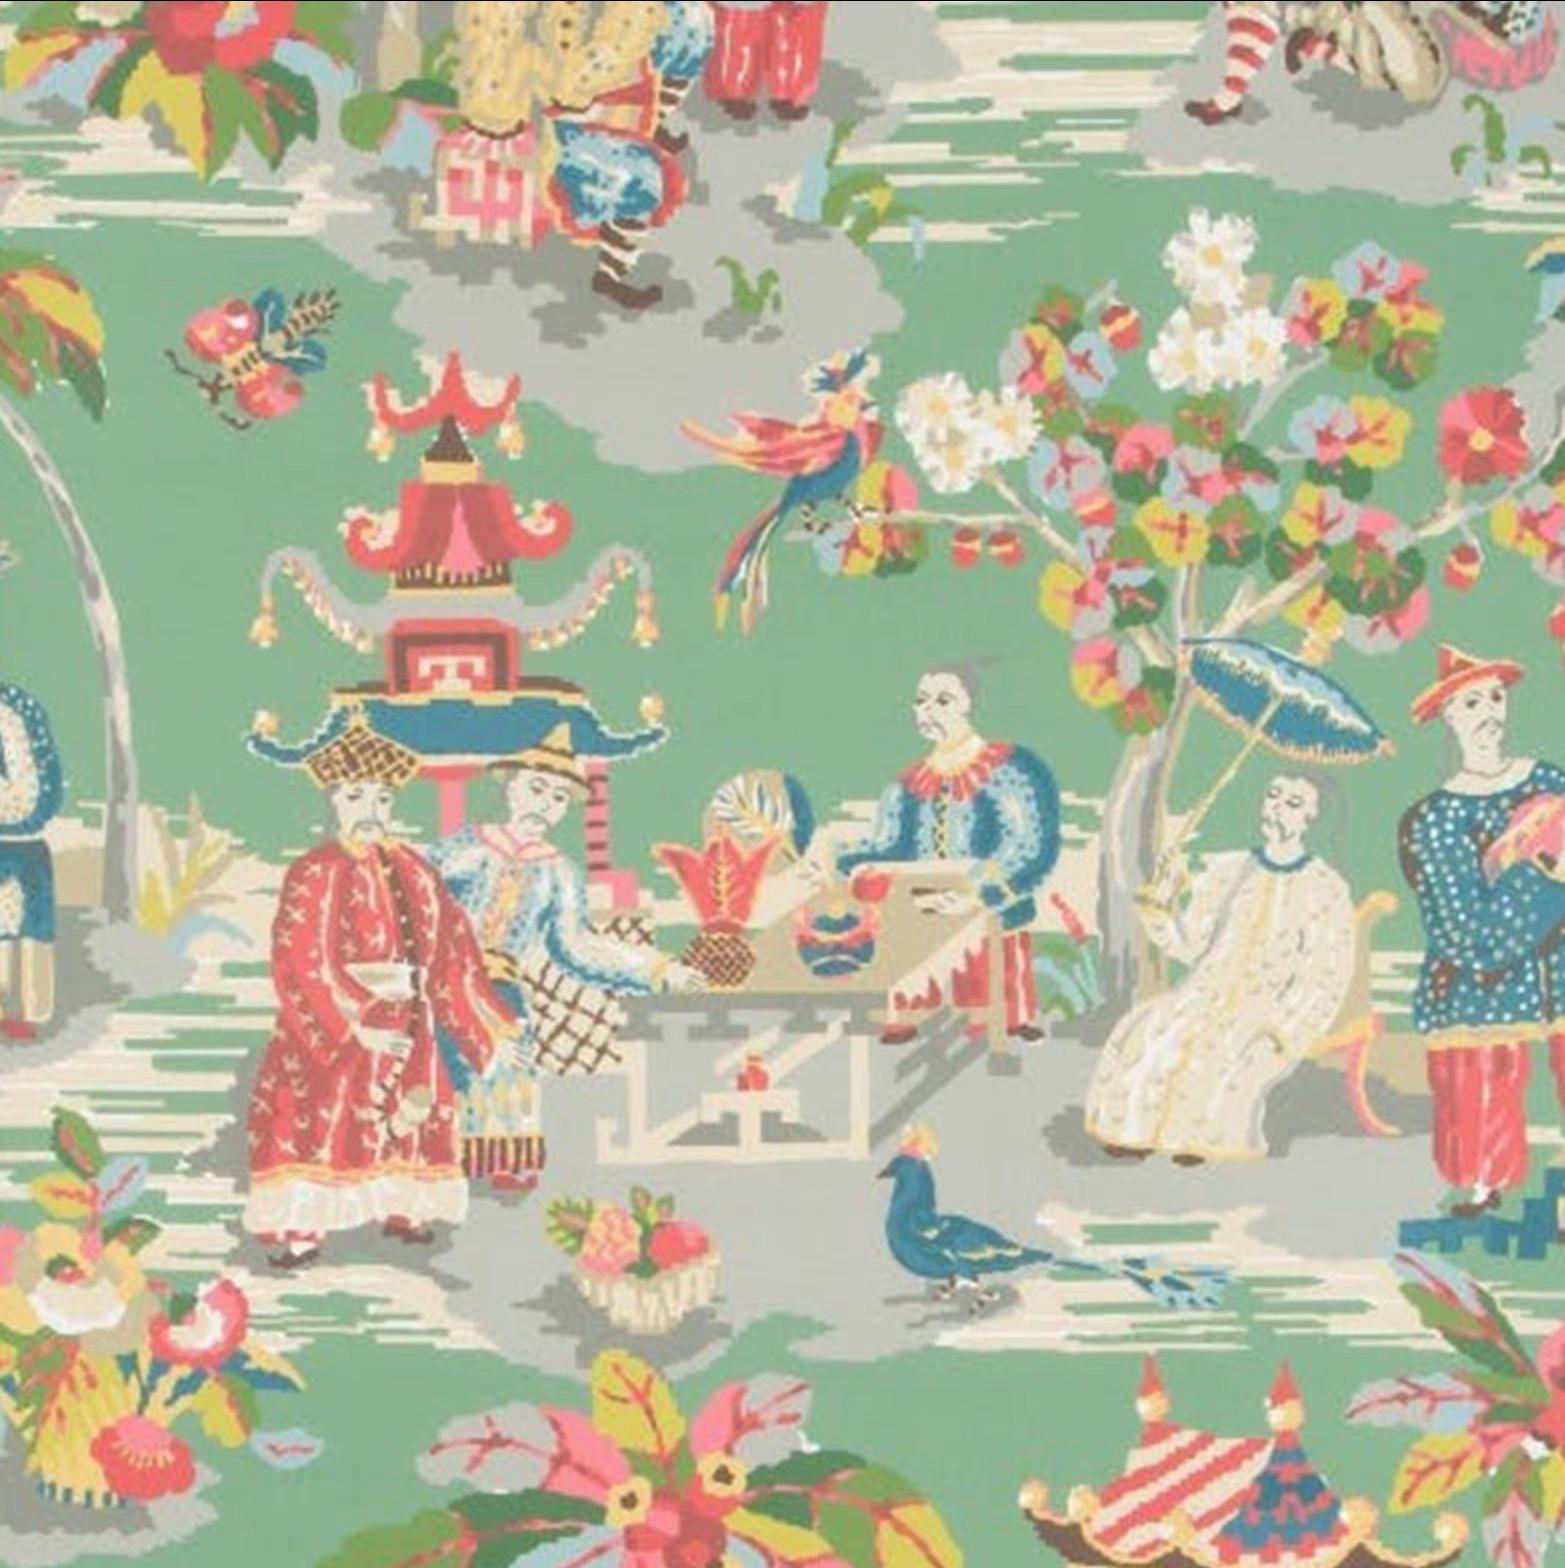 Brunschwig & Fils chinoiserie hand-printed Xian jade wallpaper double roll. Listing is for a double roll, approximate 11 yards, new. Gorgeous Figurative green and pink chinoiserie print by the iconic house of Brunschwig & Fils. Originally introduced